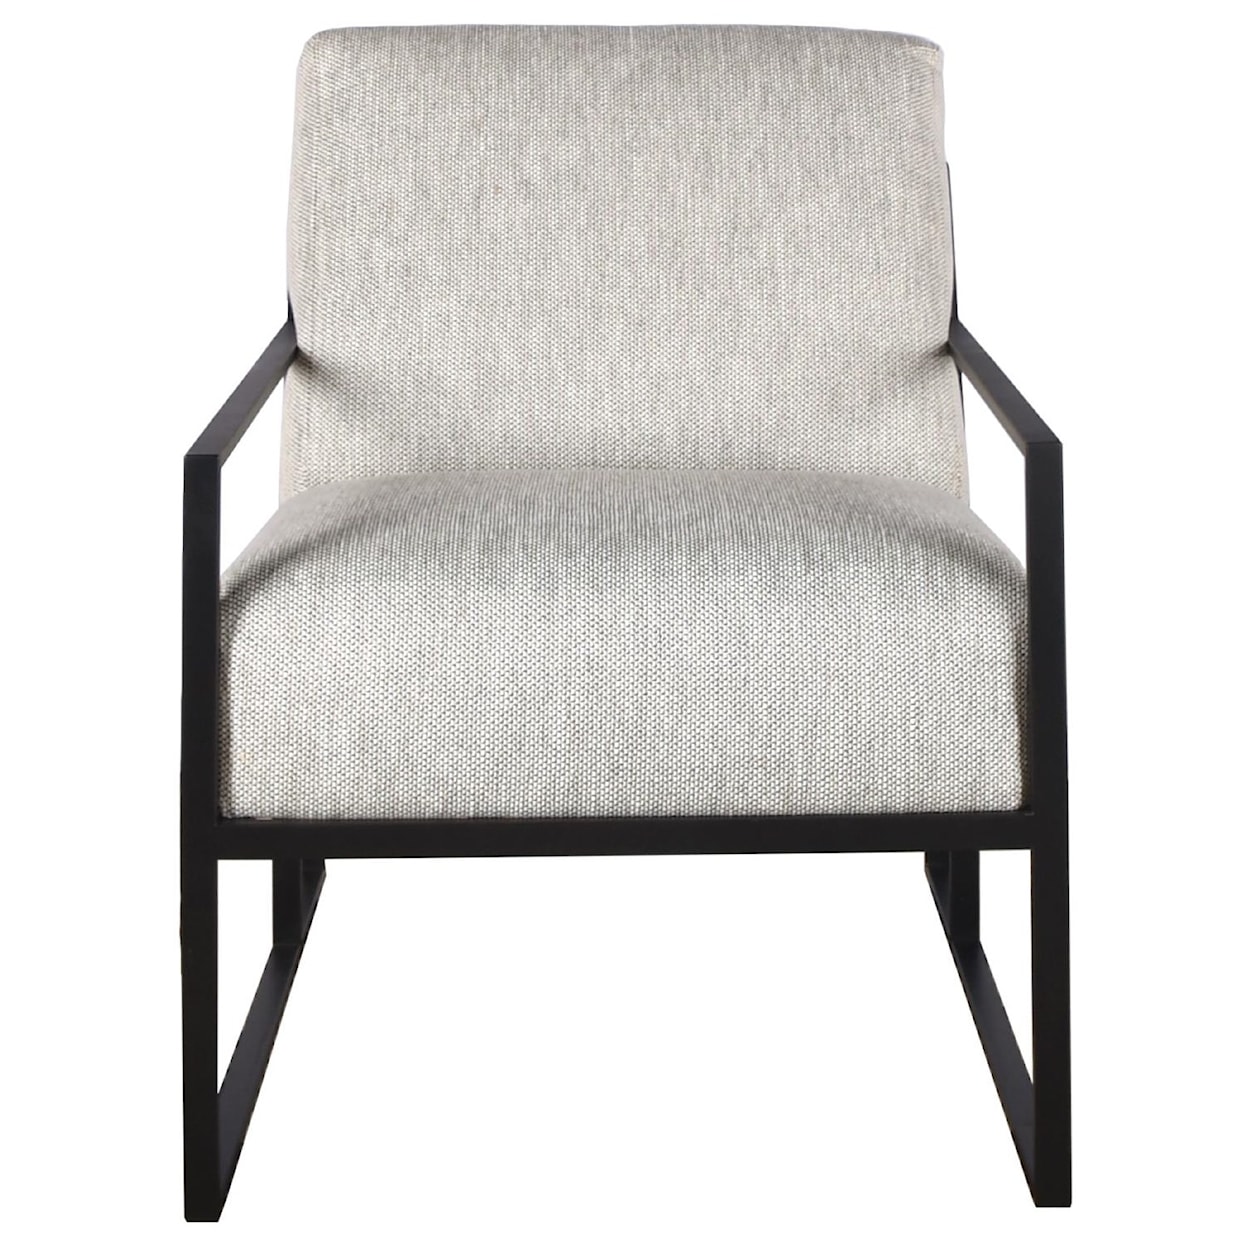 Taelor Designs Milly Mid-Century Accent Chair